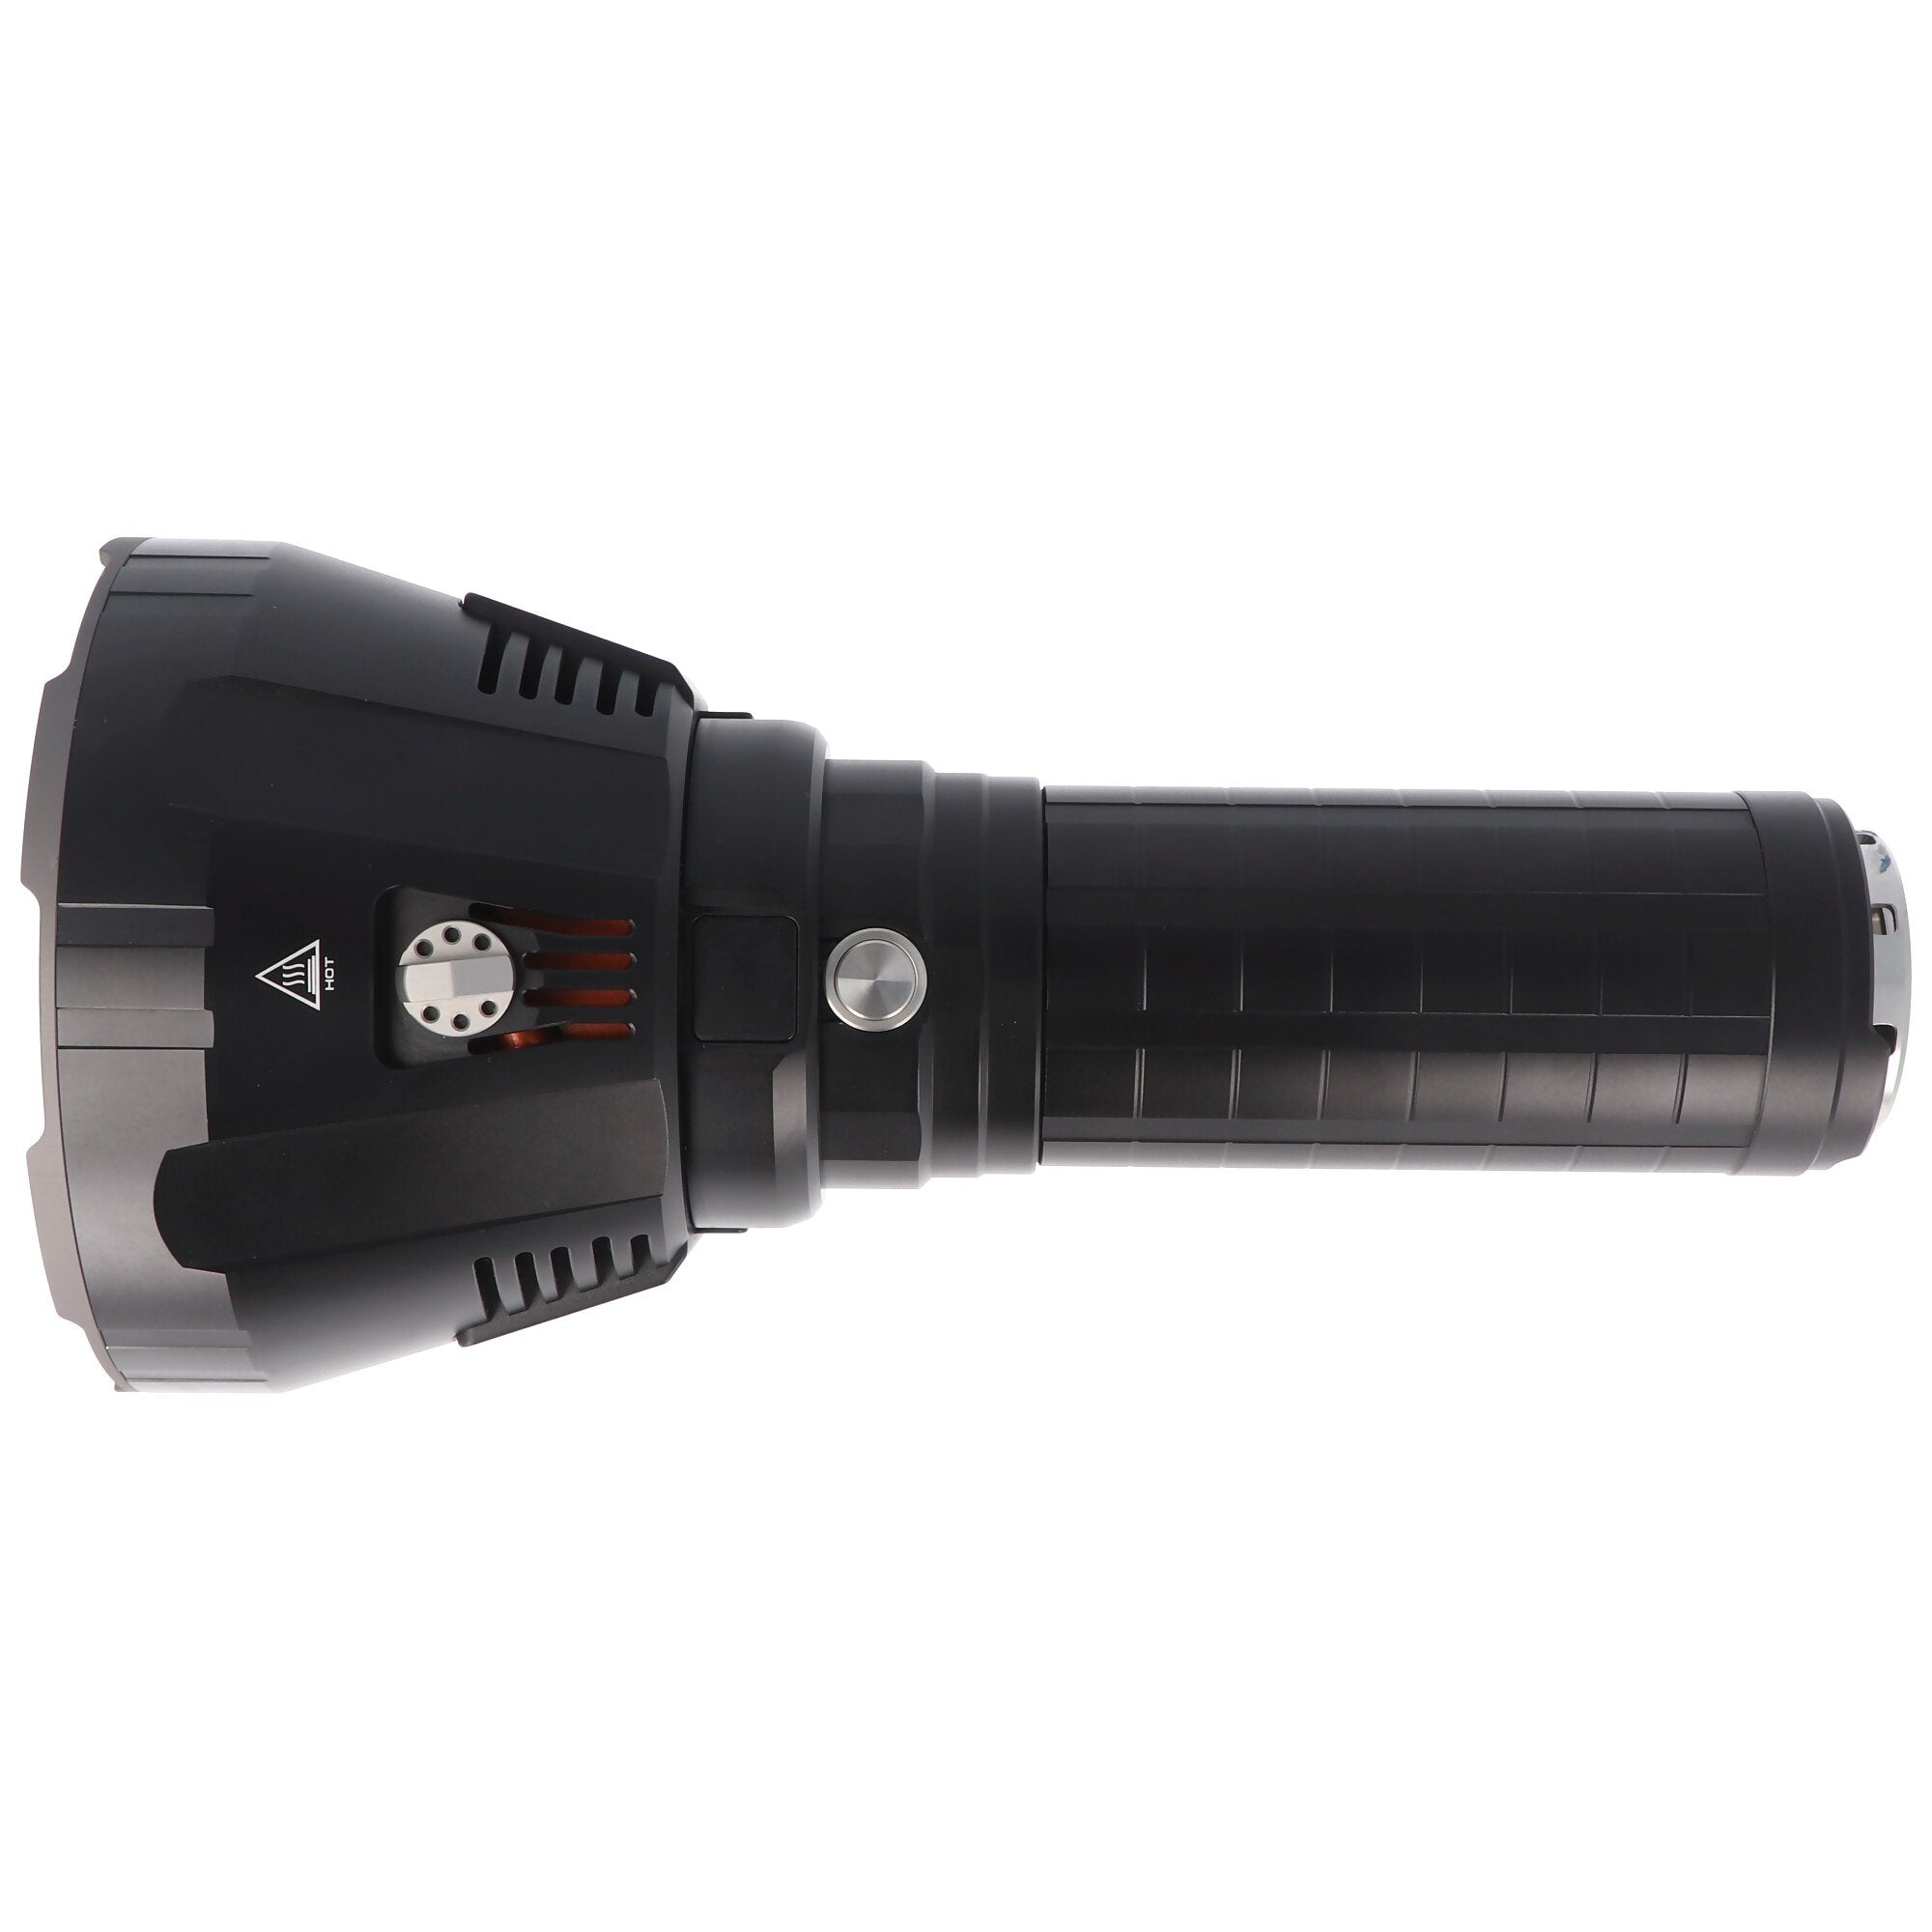 100,000 lumens Imalent MS18 LED flashlight with max. 100,000 lumens, including battery and charger